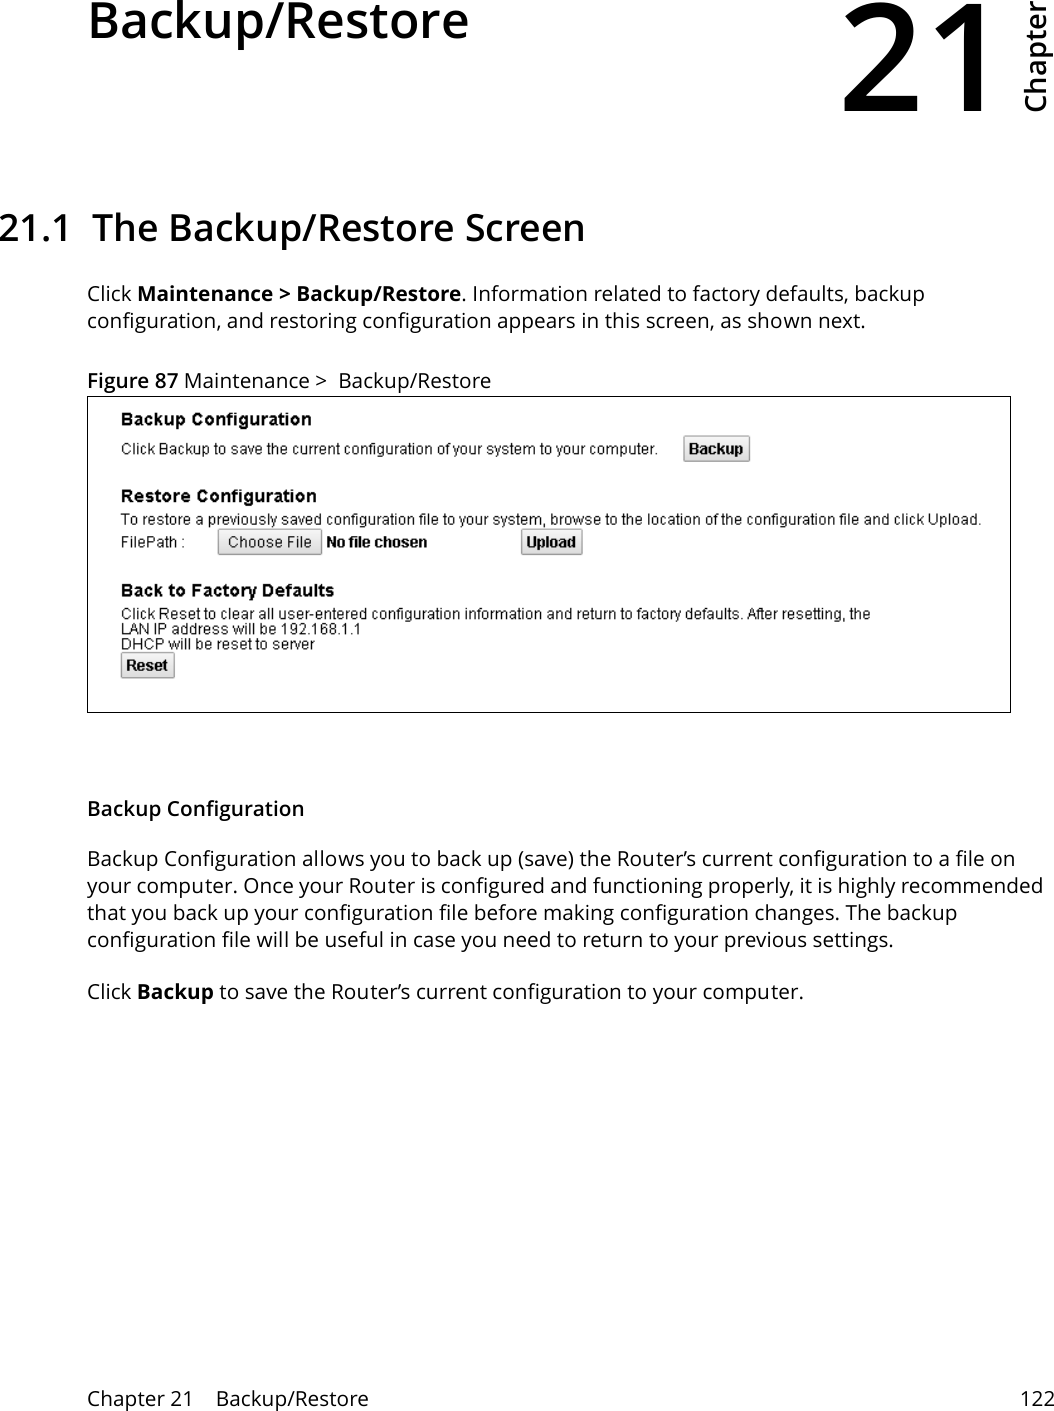 21Chapter Chapter 21    Backup/Restore 122CHAPTER 21 Chapter 21 Backup/Restore21.1  The Backup/Restore Screen Click Maintenance &gt; Backup/Restore. Information related to factory defaults, backup configuration, and restoring configuration appears in this screen, as shown next.Figure 87 Maintenance &gt;  Backup/RestoreBackup Configuration Backup Configuration allows you to back up (save) the Router’s current configuration to a file on your computer. Once your Router is configured and functioning properly, it is highly recommended that you back up your configuration file before making configuration changes. The backup configuration file will be useful in case you need to return to your previous settings. Click Backup to save the Router’s current configuration to your computer.